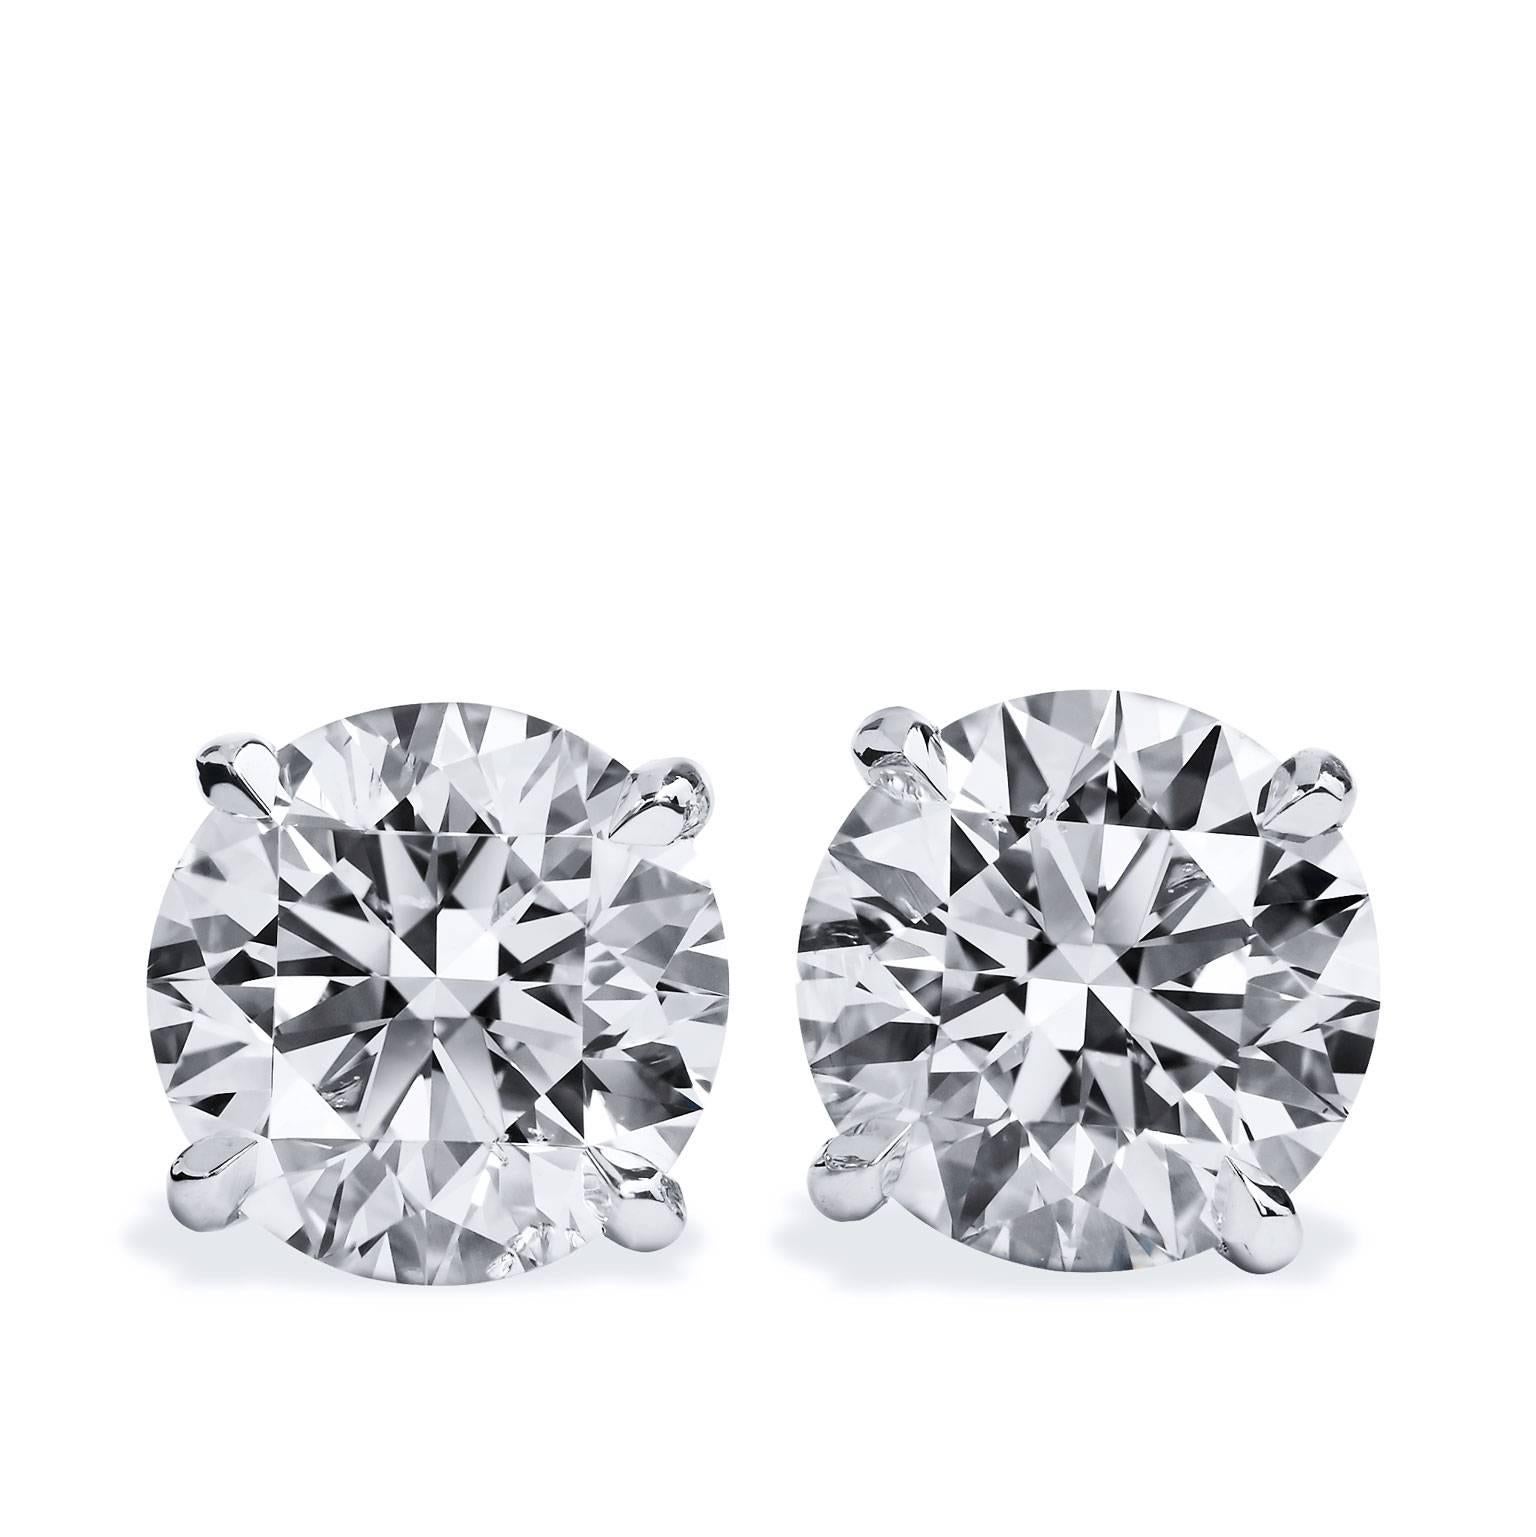 The perfect accessory to complete your sleek and stylish look. These handmade H and H 18 karat white gold round brilliant cut diamond stud earrings are just charming. Two diamonds with a total weight of 4.45 carat are four-prong set and are H in